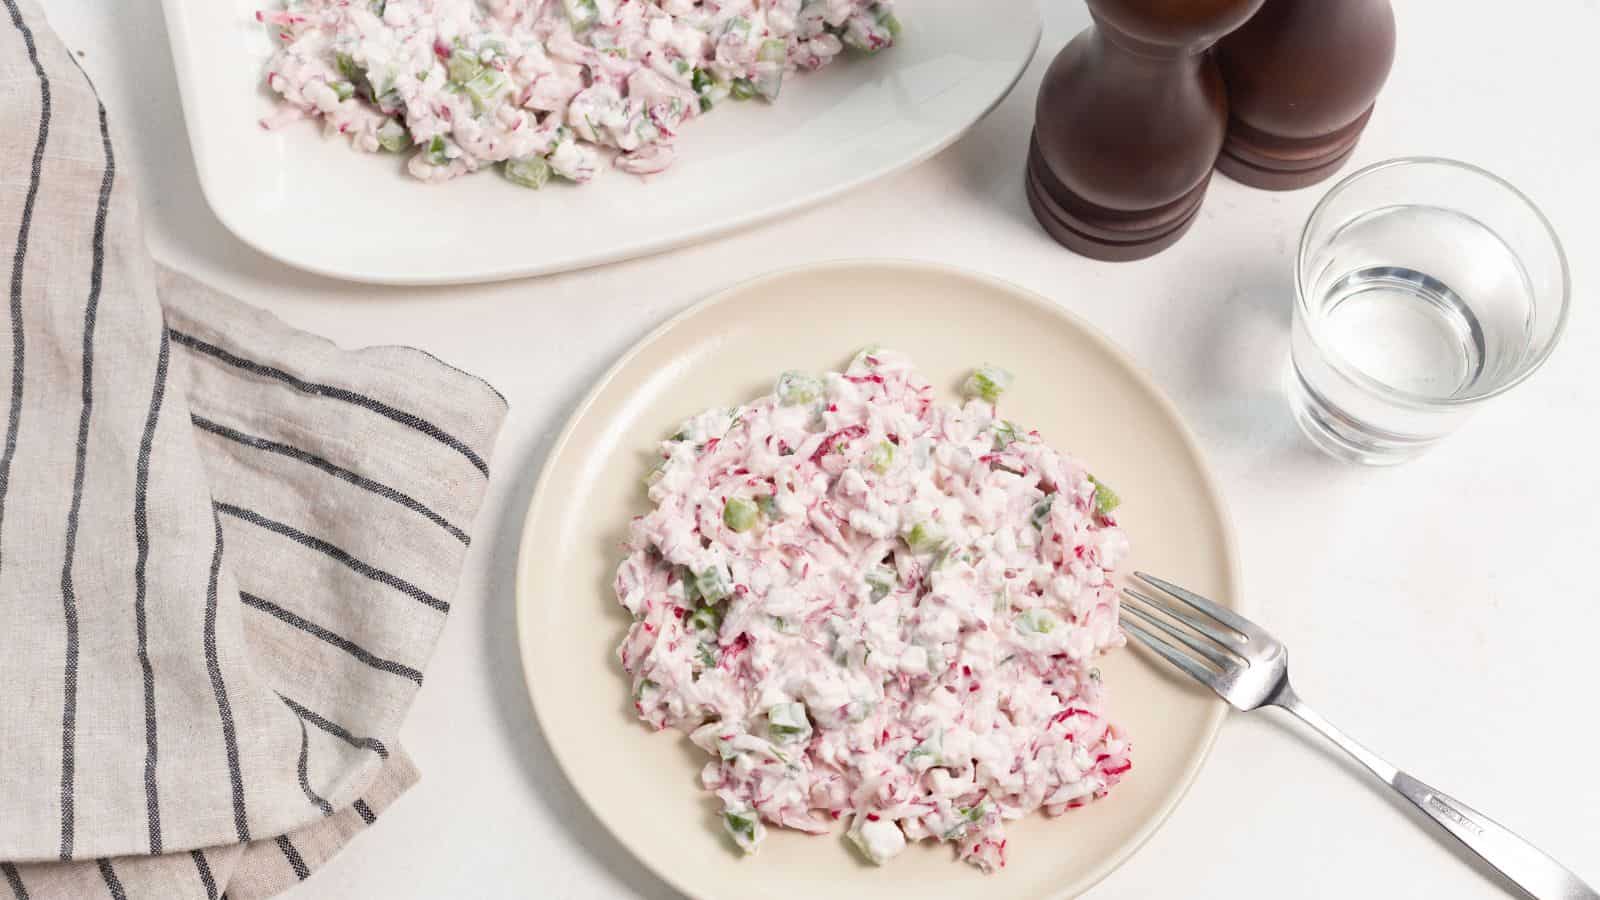 A plate of radish salad with diced celery and a creamy dressing, accompanied by a glass of water and salt and pepper shakers.